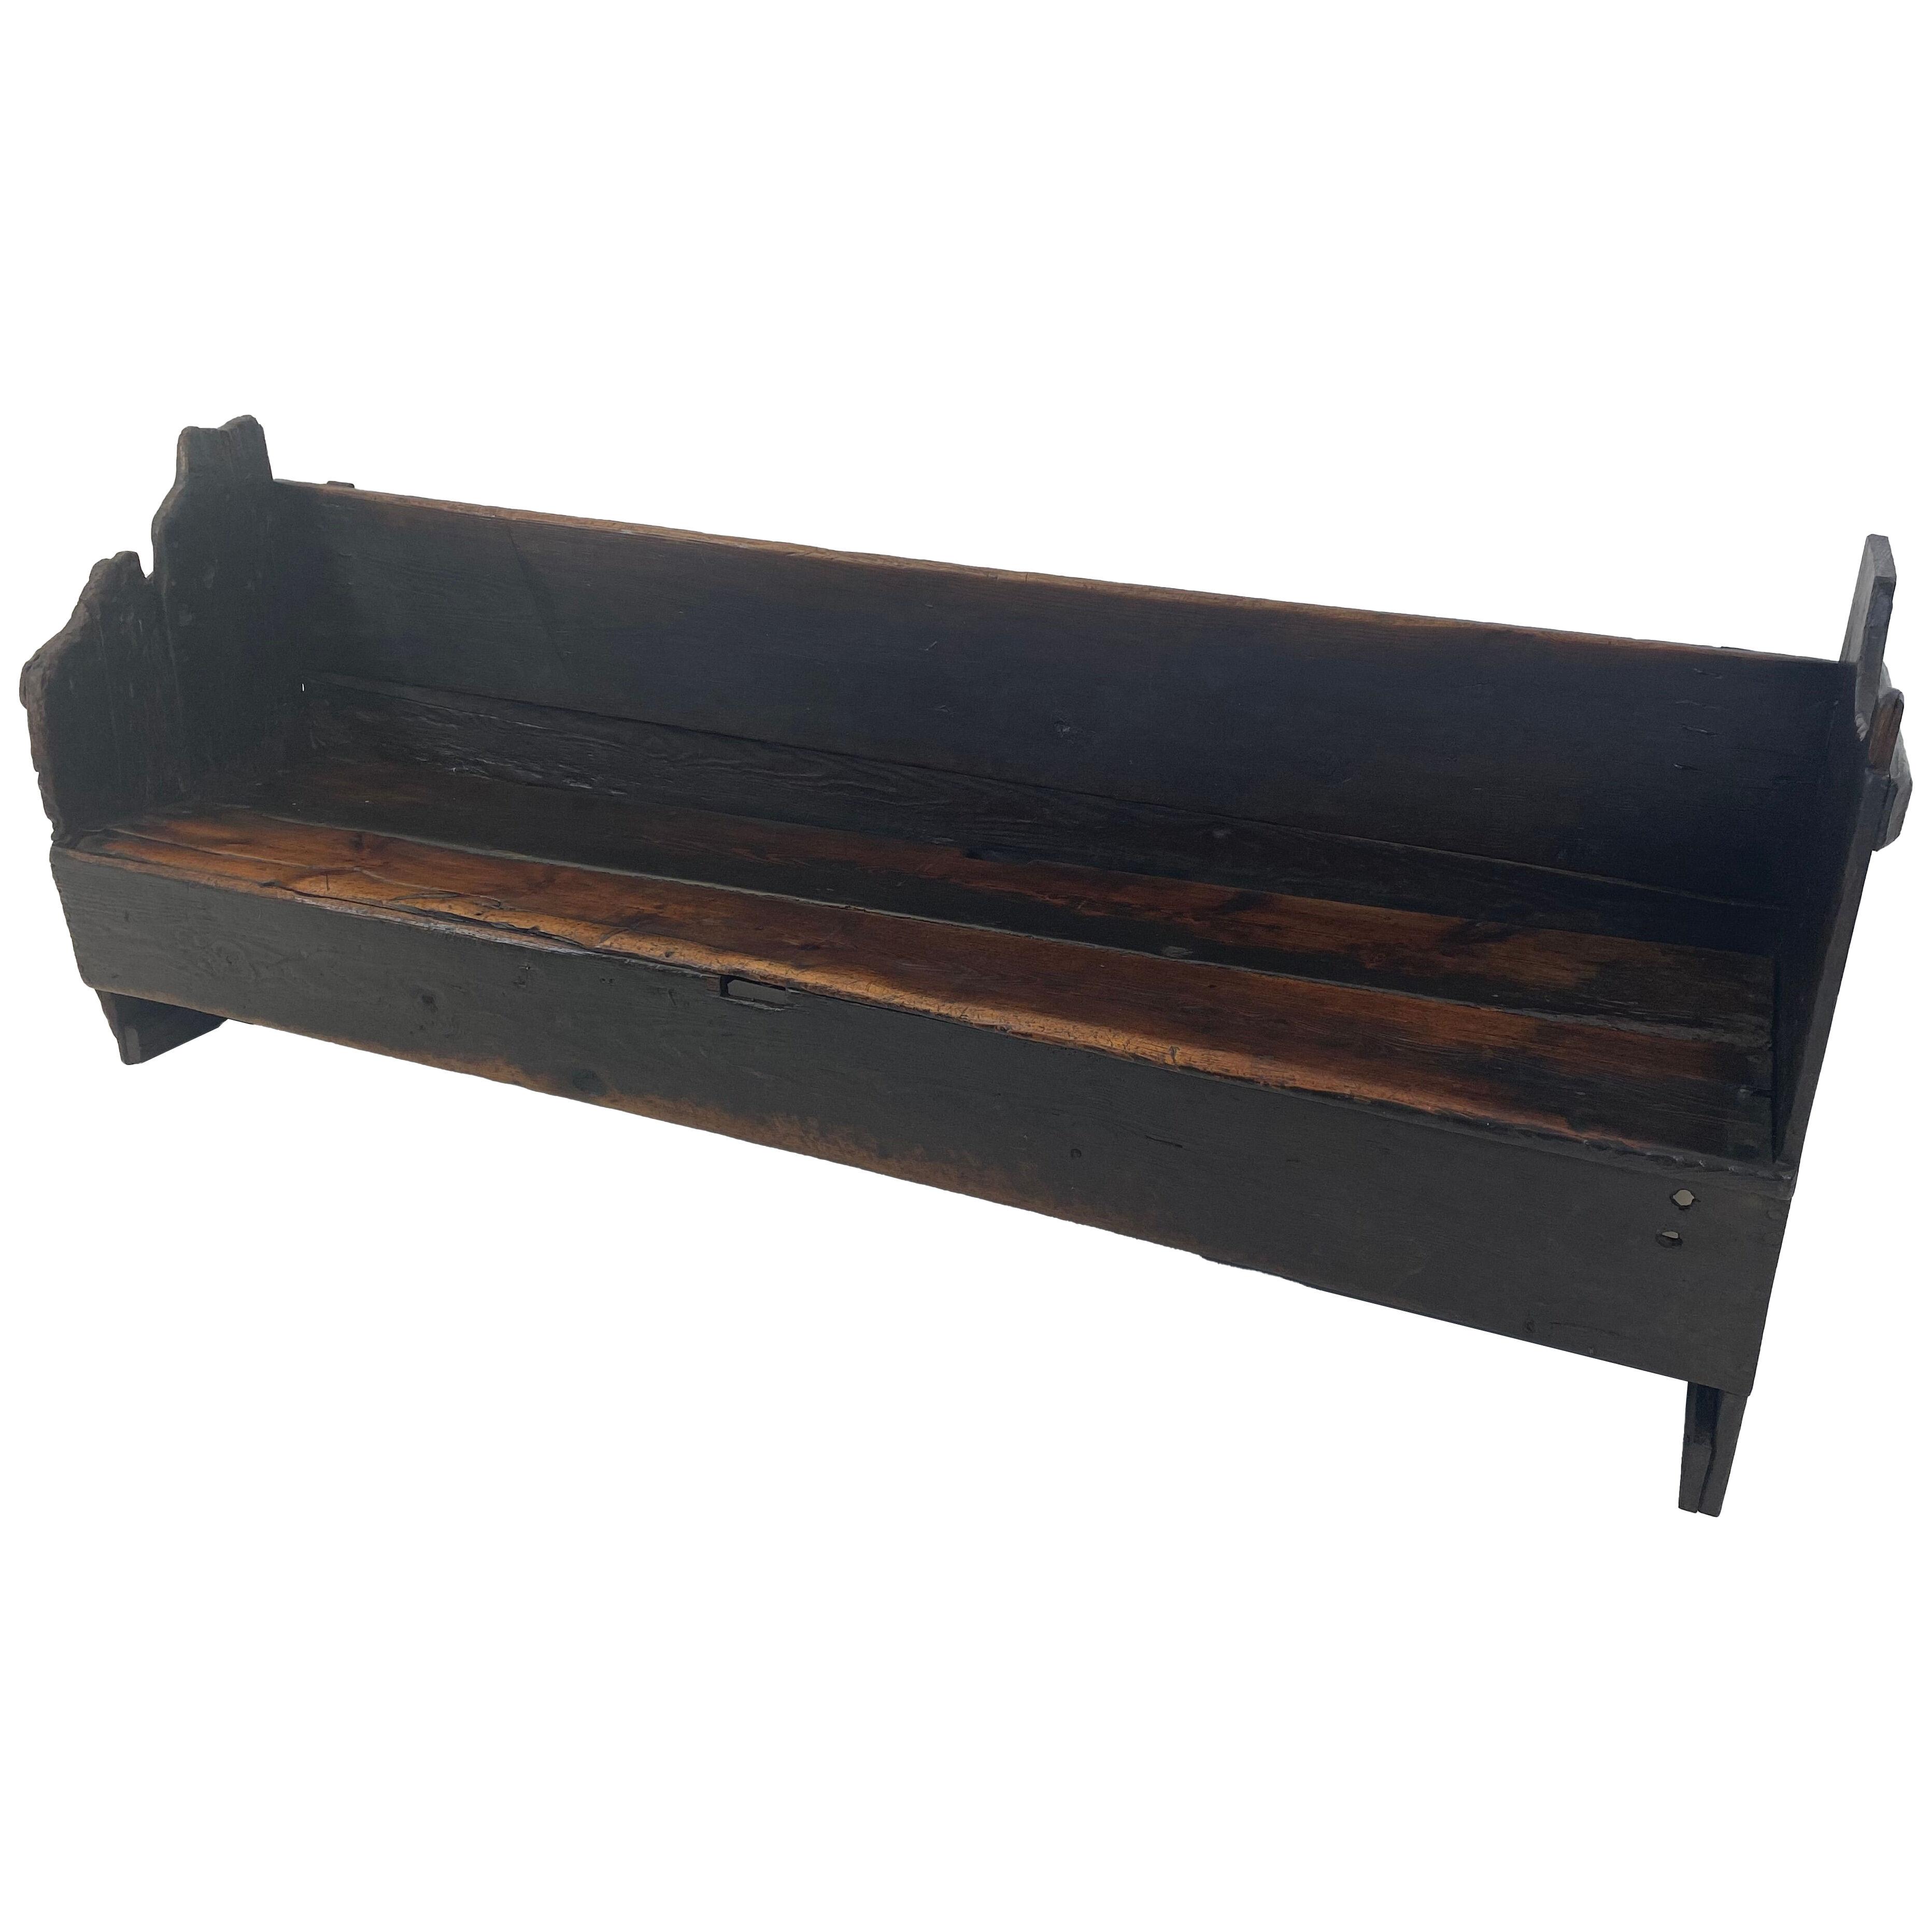 Minimalist,Rustic antique Bench from Spain